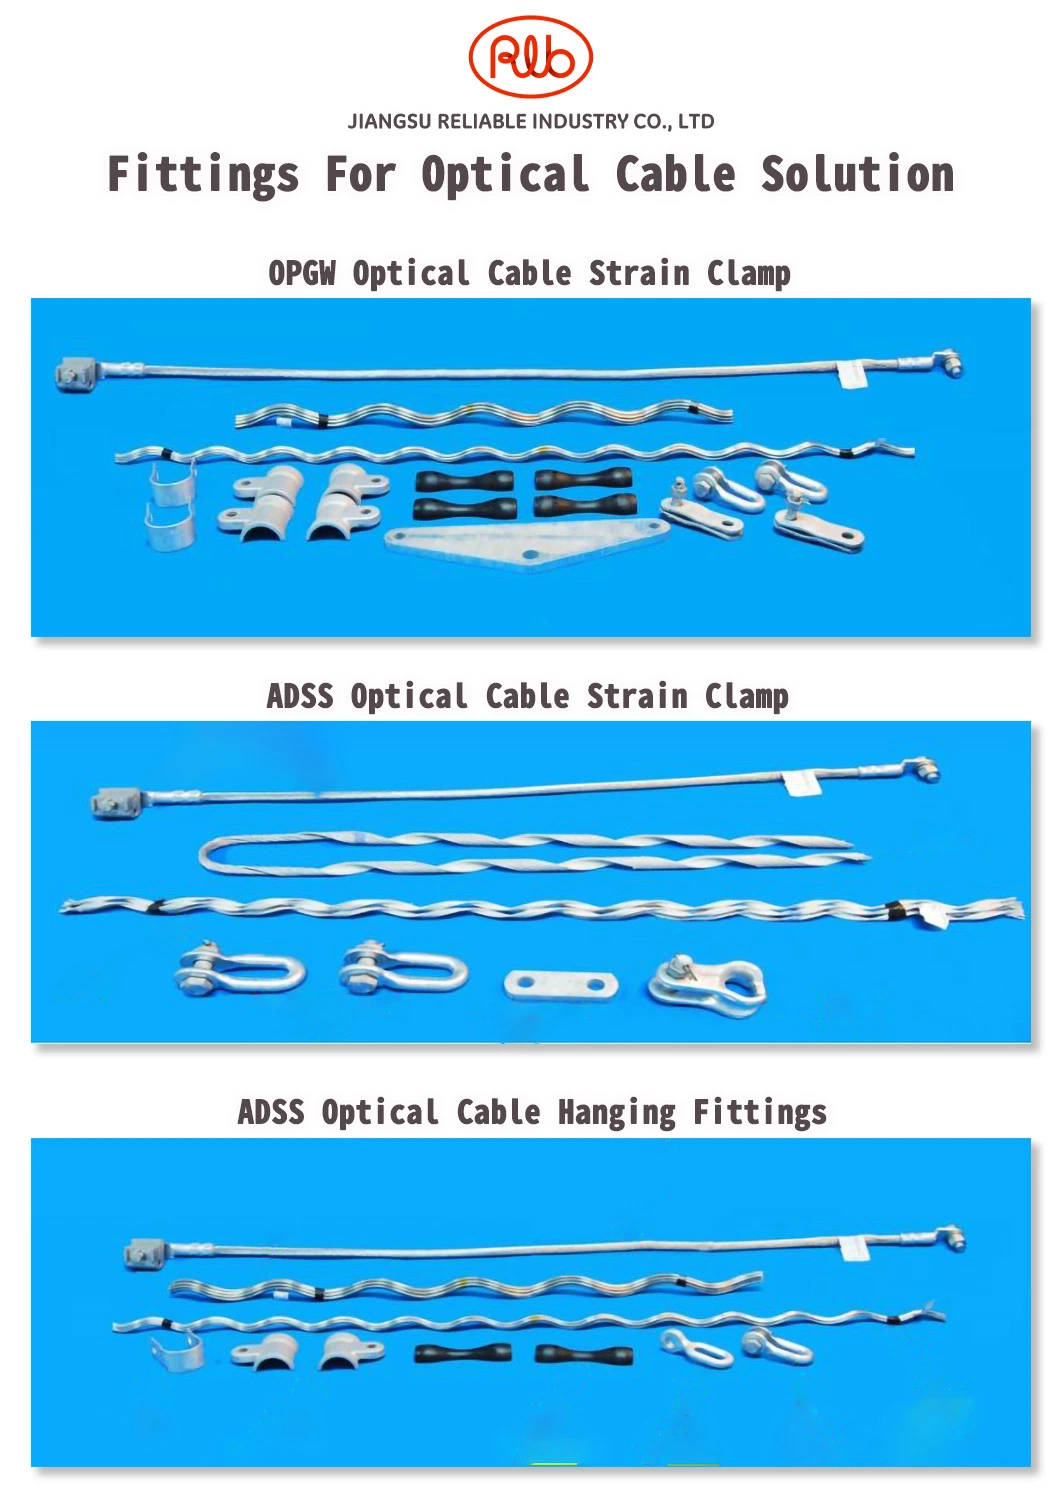 Enough Strength Grip Insulated Hanging Fittings for Opgw/ADSS Optical Cable